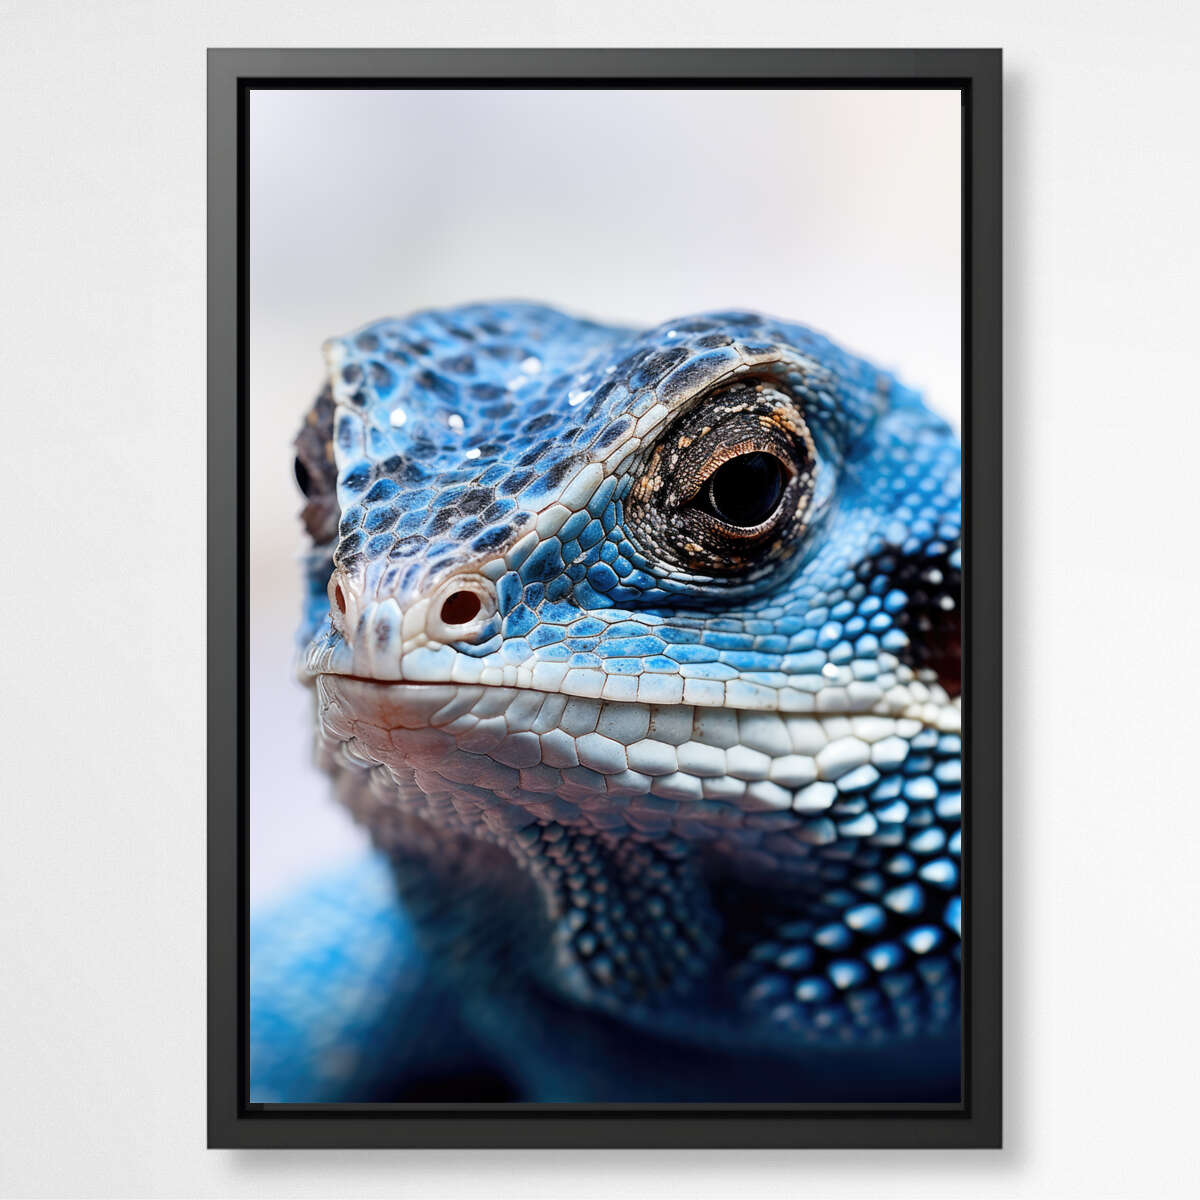 Abstract Portrait of a Blue Tongued Lizard | Australiana Wall Art Prints - The Canvas Hive